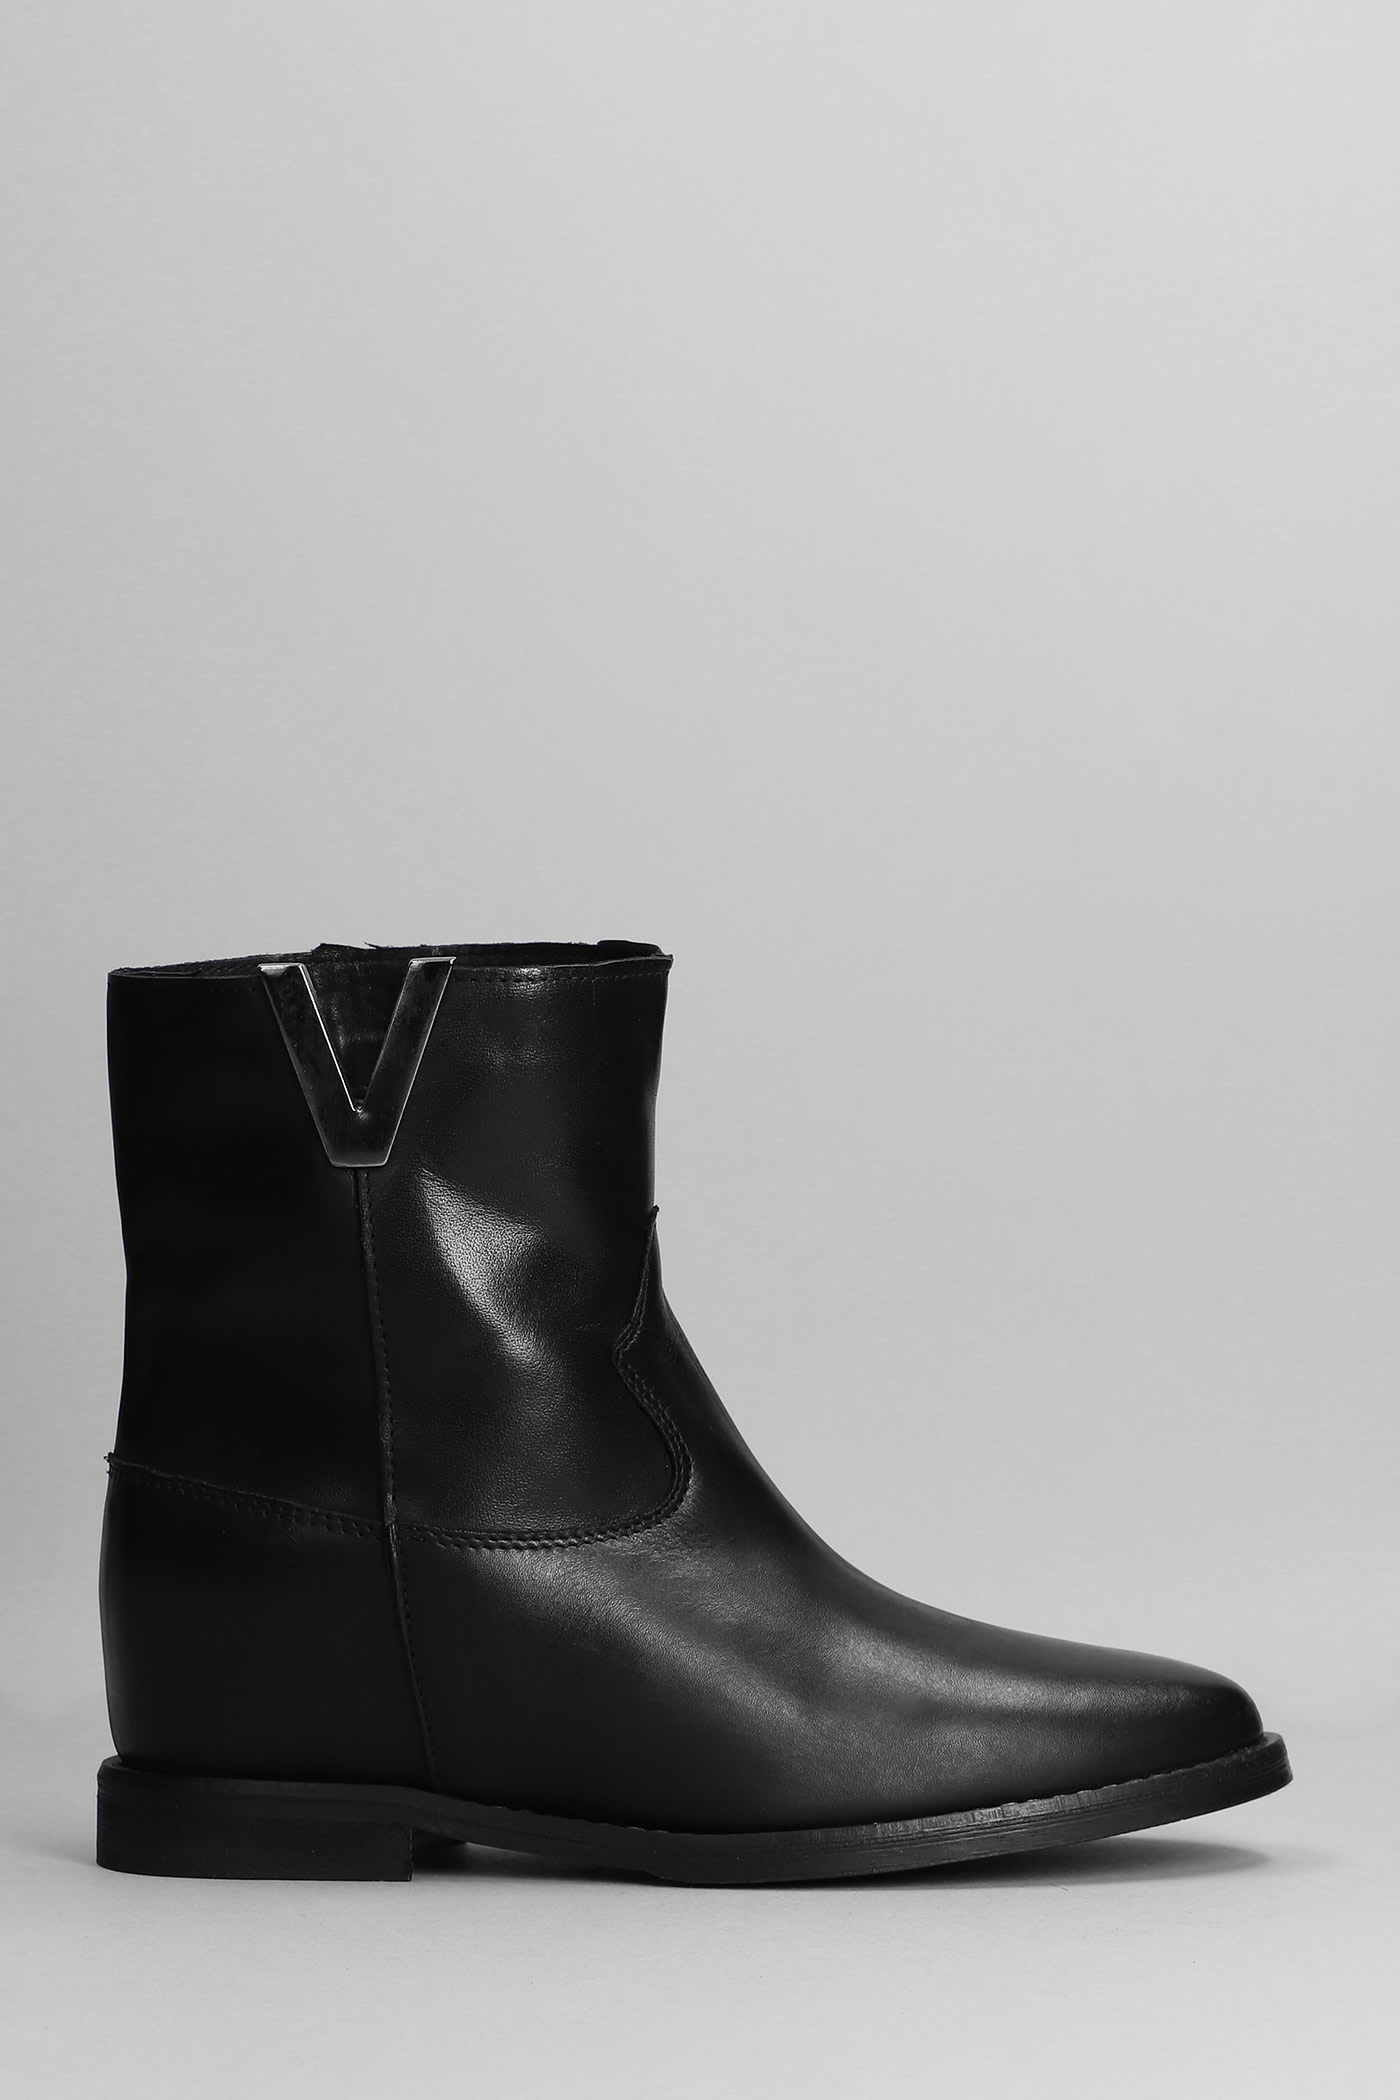 Julie Dee Ankle Boots Inside Wedge In Black Leather